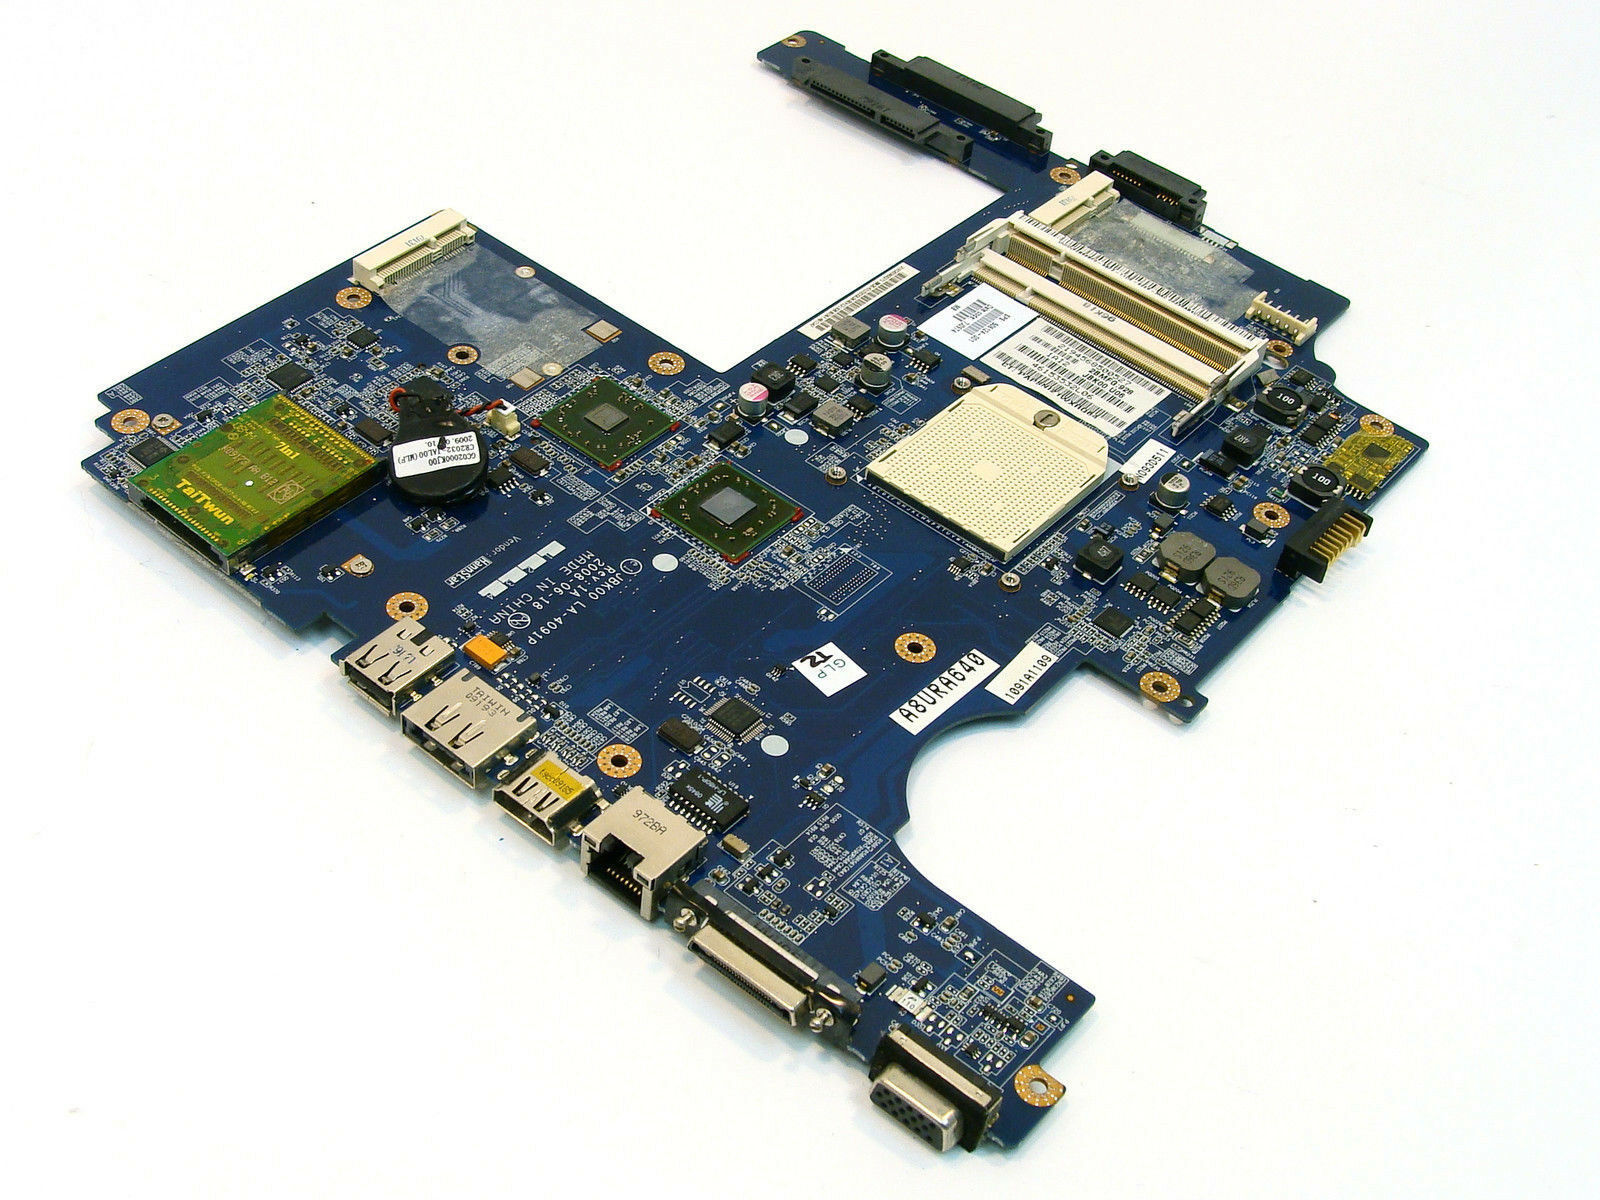 HP DV7- 1240US 1260US 1464NR 1267CL 506124-001 Motherboard HDMI Tested New BIOS Tracking Number is INCLUDED, - Click Image to Close